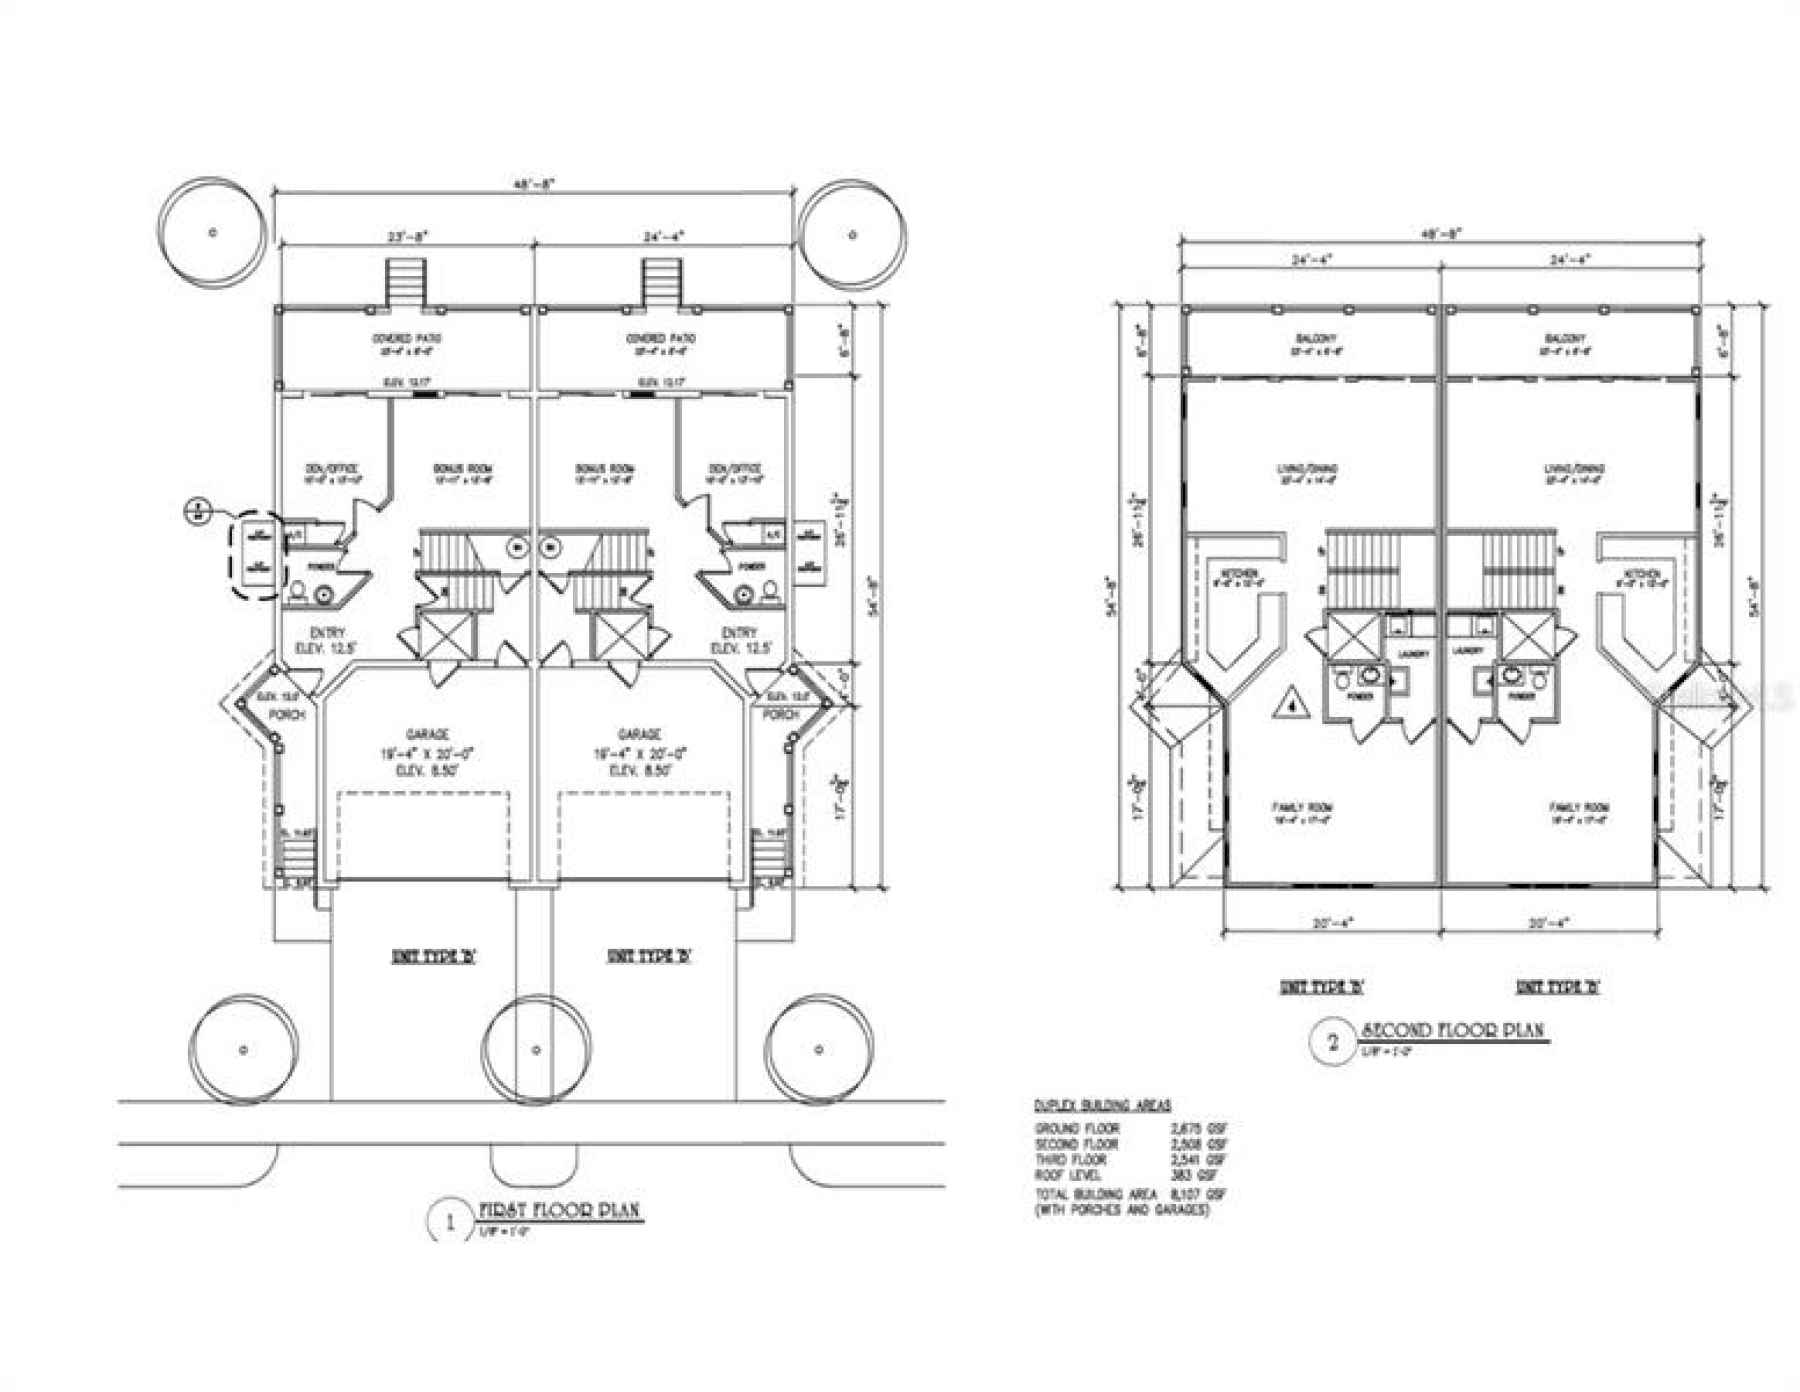 Floor Plan B 1st and 2nd level